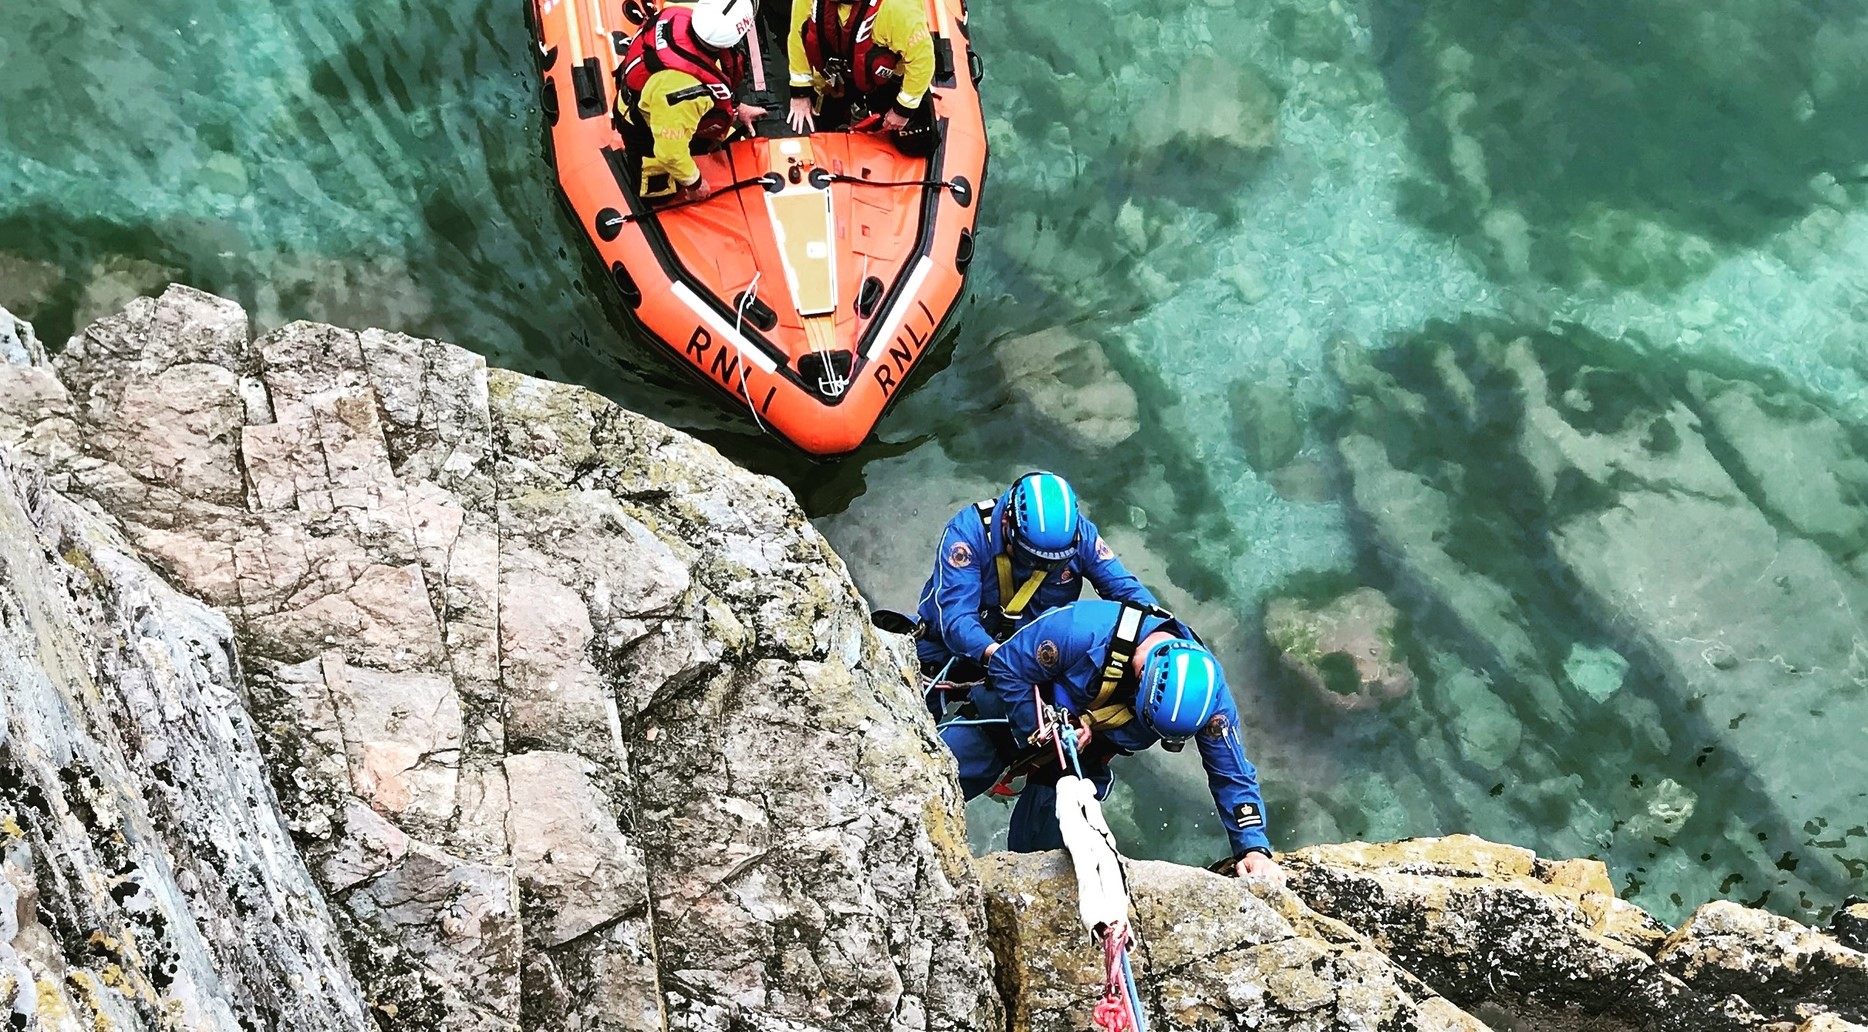 An RNLI lifeboat below HM Coastguard rope rescue team on a cliff